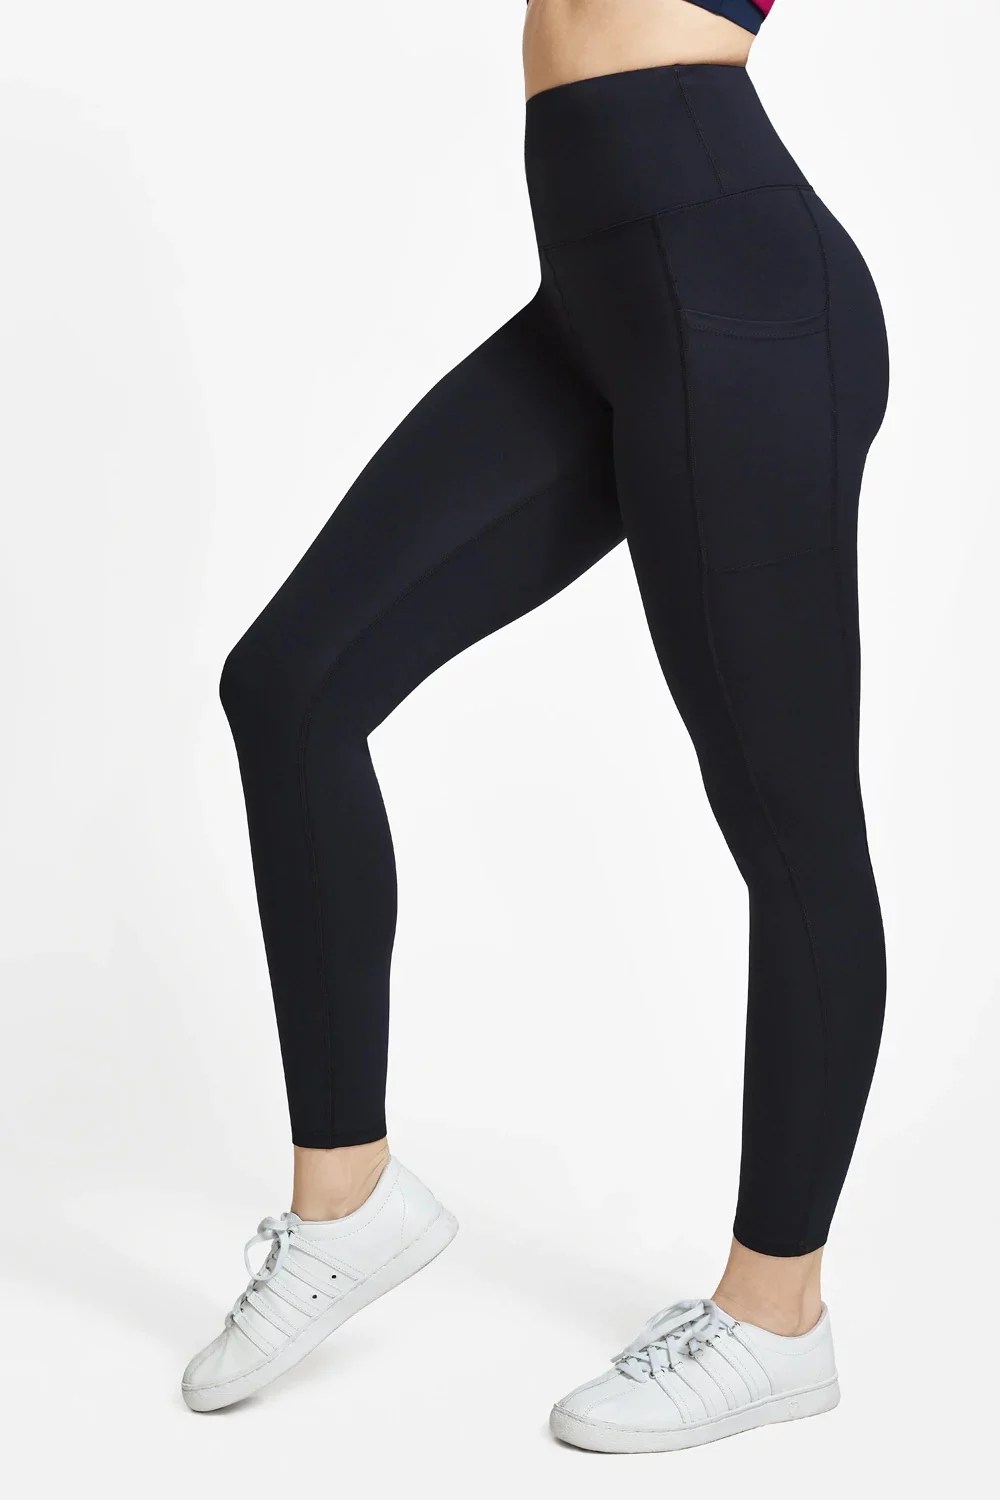 12 Best Workout Leggings of 2023 Tested by Experts